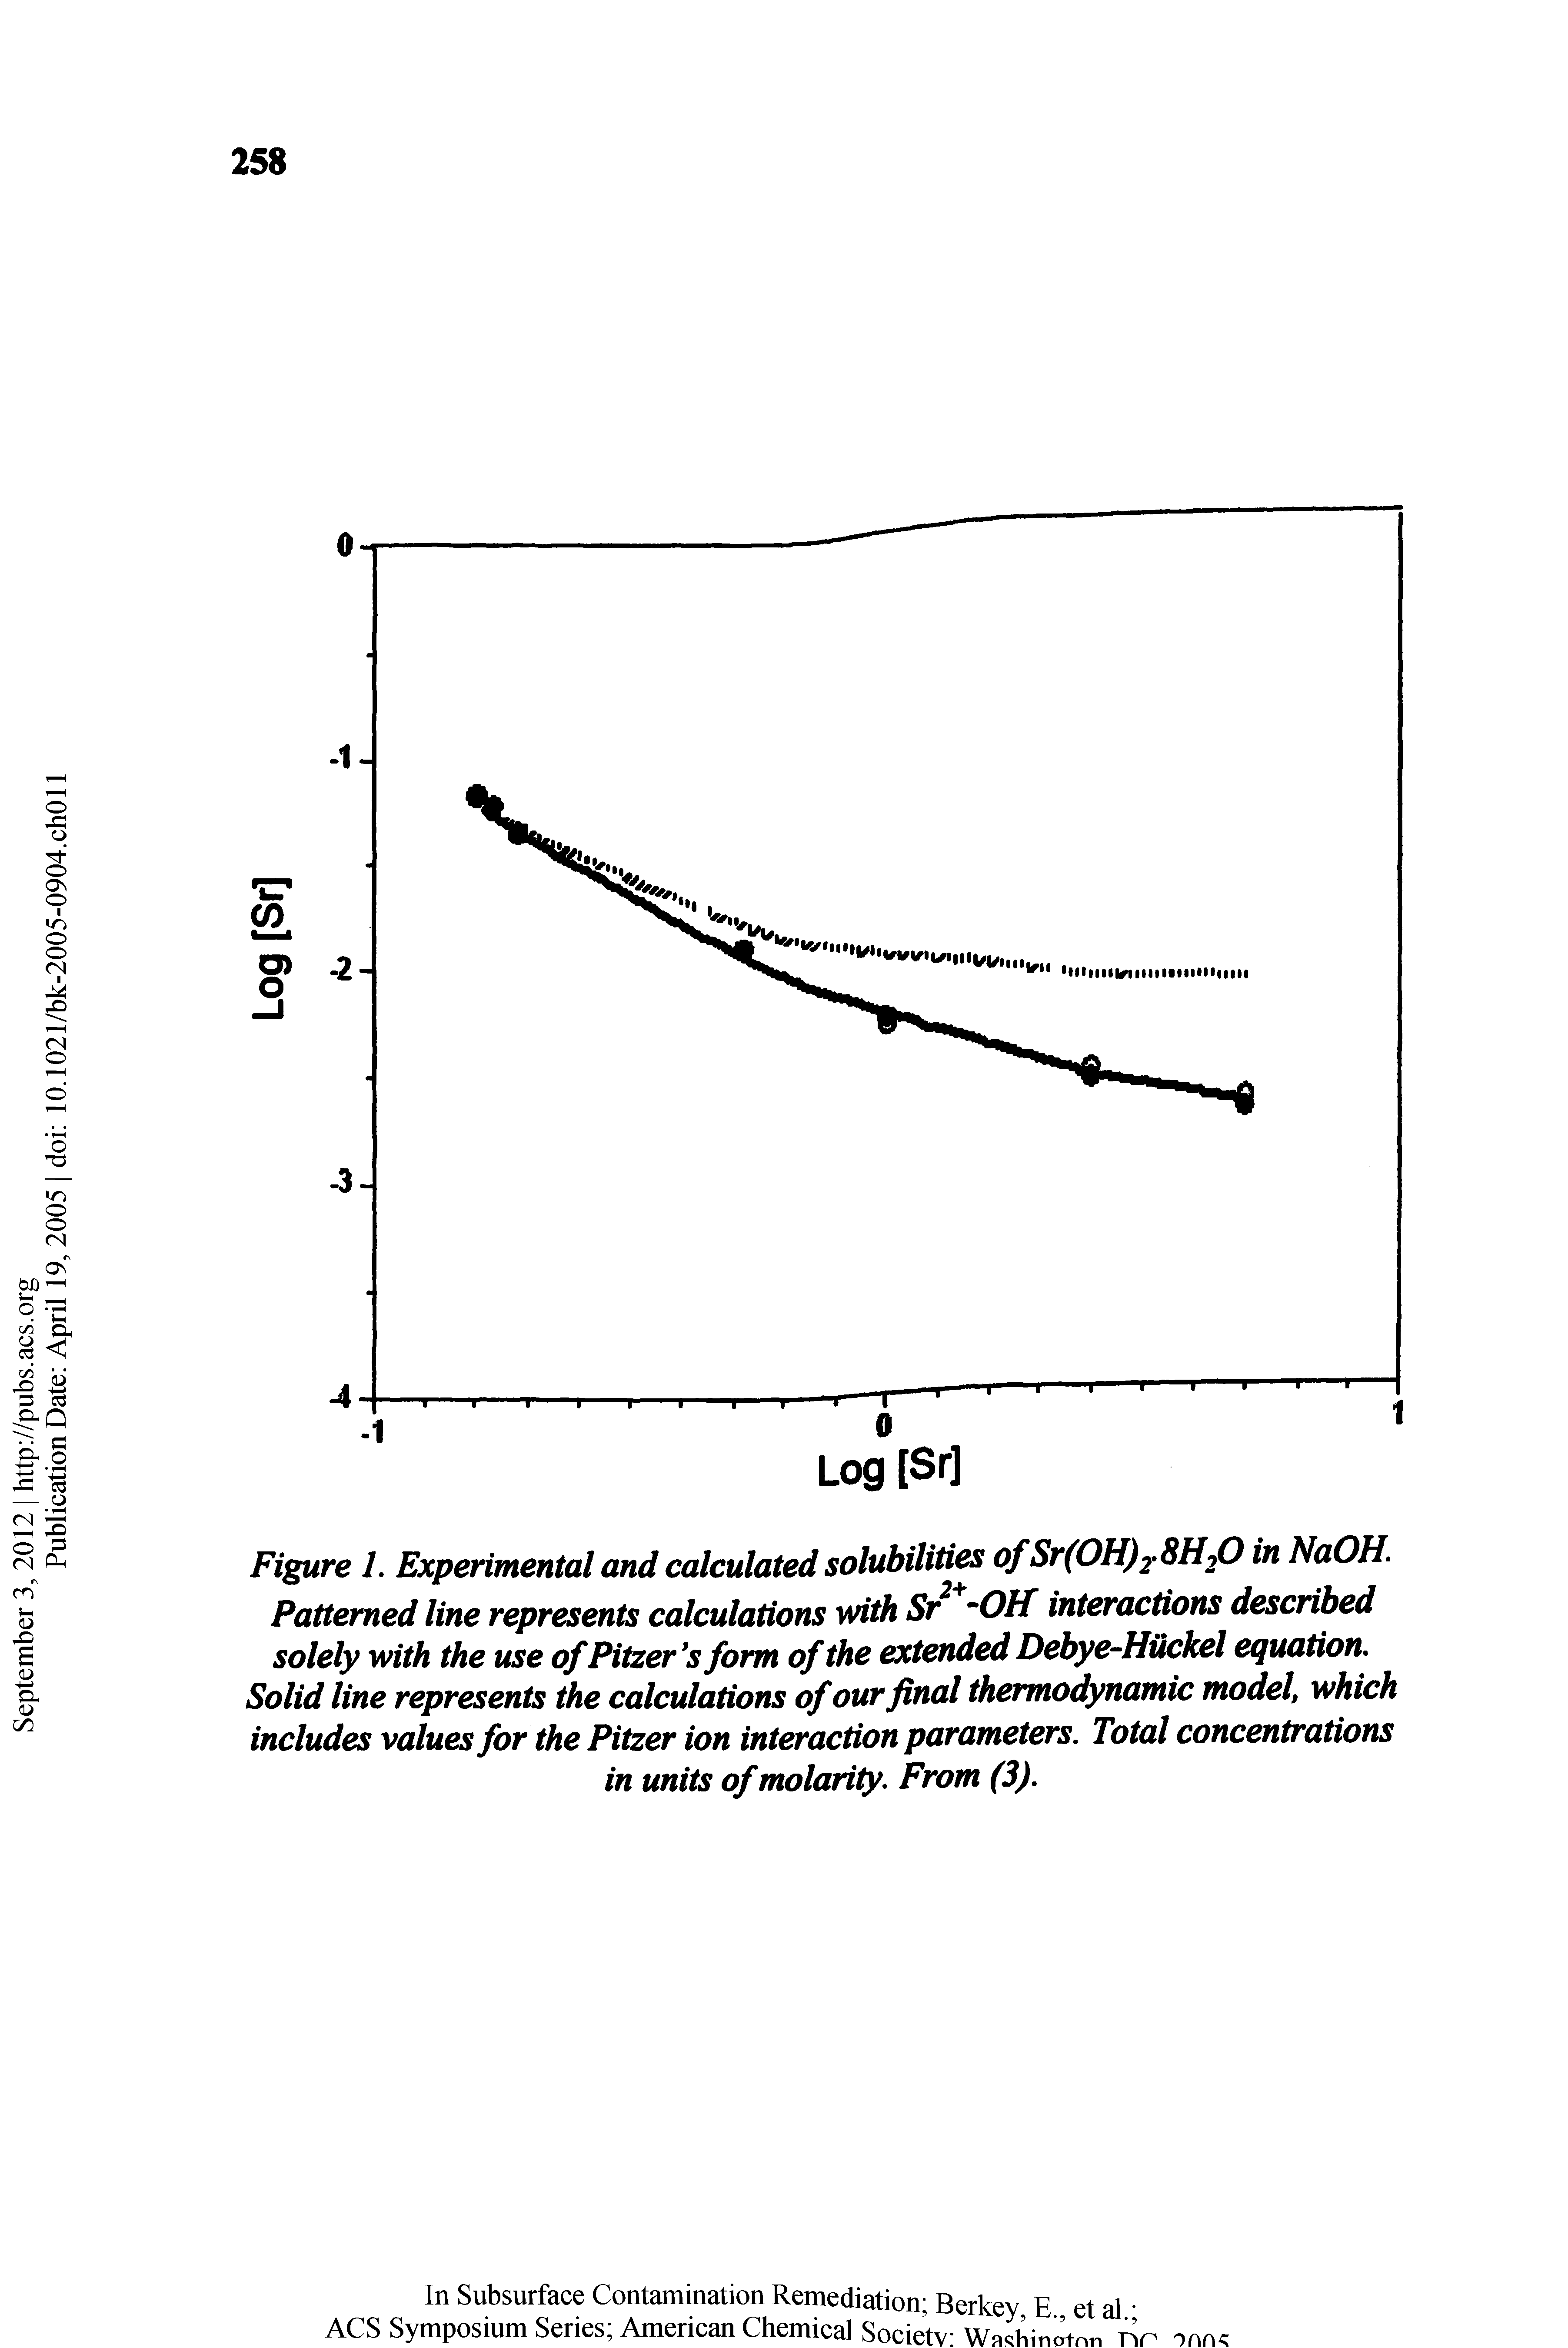 Figure 1. Experimental and calculated solubiliti ofSr(OH) 8H20 in NaOK Patterned line represents calculations with Sr OH interactions described solely with the use ofPitzer s form of the extended Debye-HOckel equation. Solid line represents the calculations of our final thermodynamic model, which includes values for the Pitzer ion interaction parameters. Total concentrations in units of molarity. From (3).